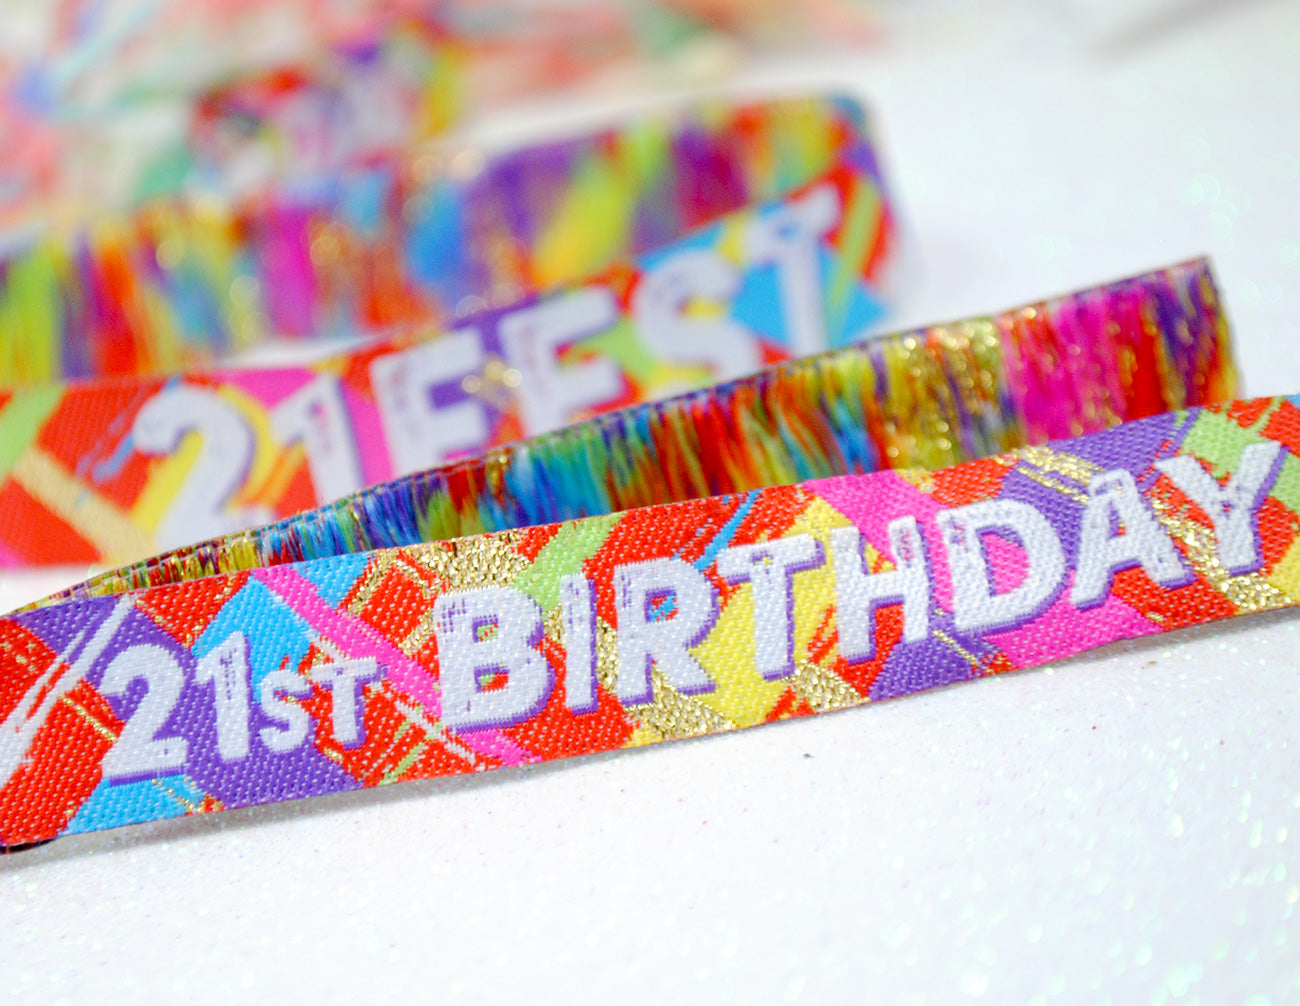 21FEST 21st birthday party wristband favours accessories